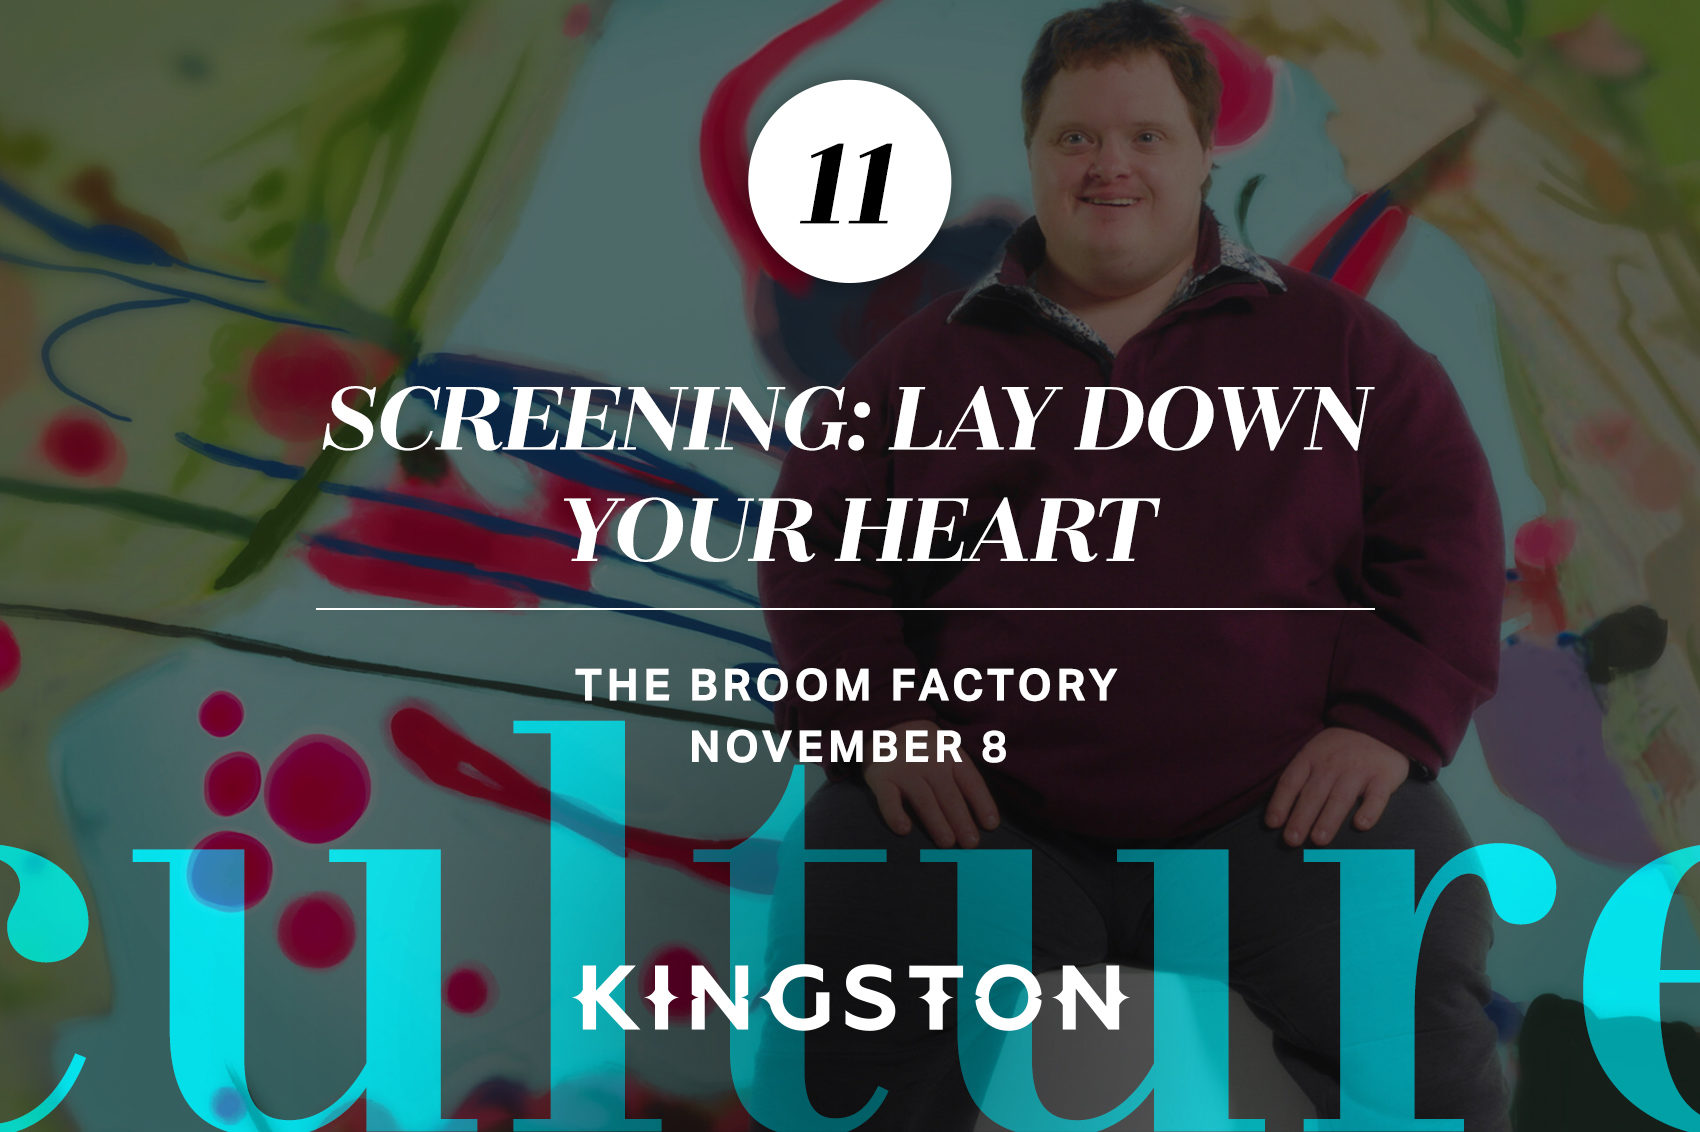 Screening: Lay down your heart